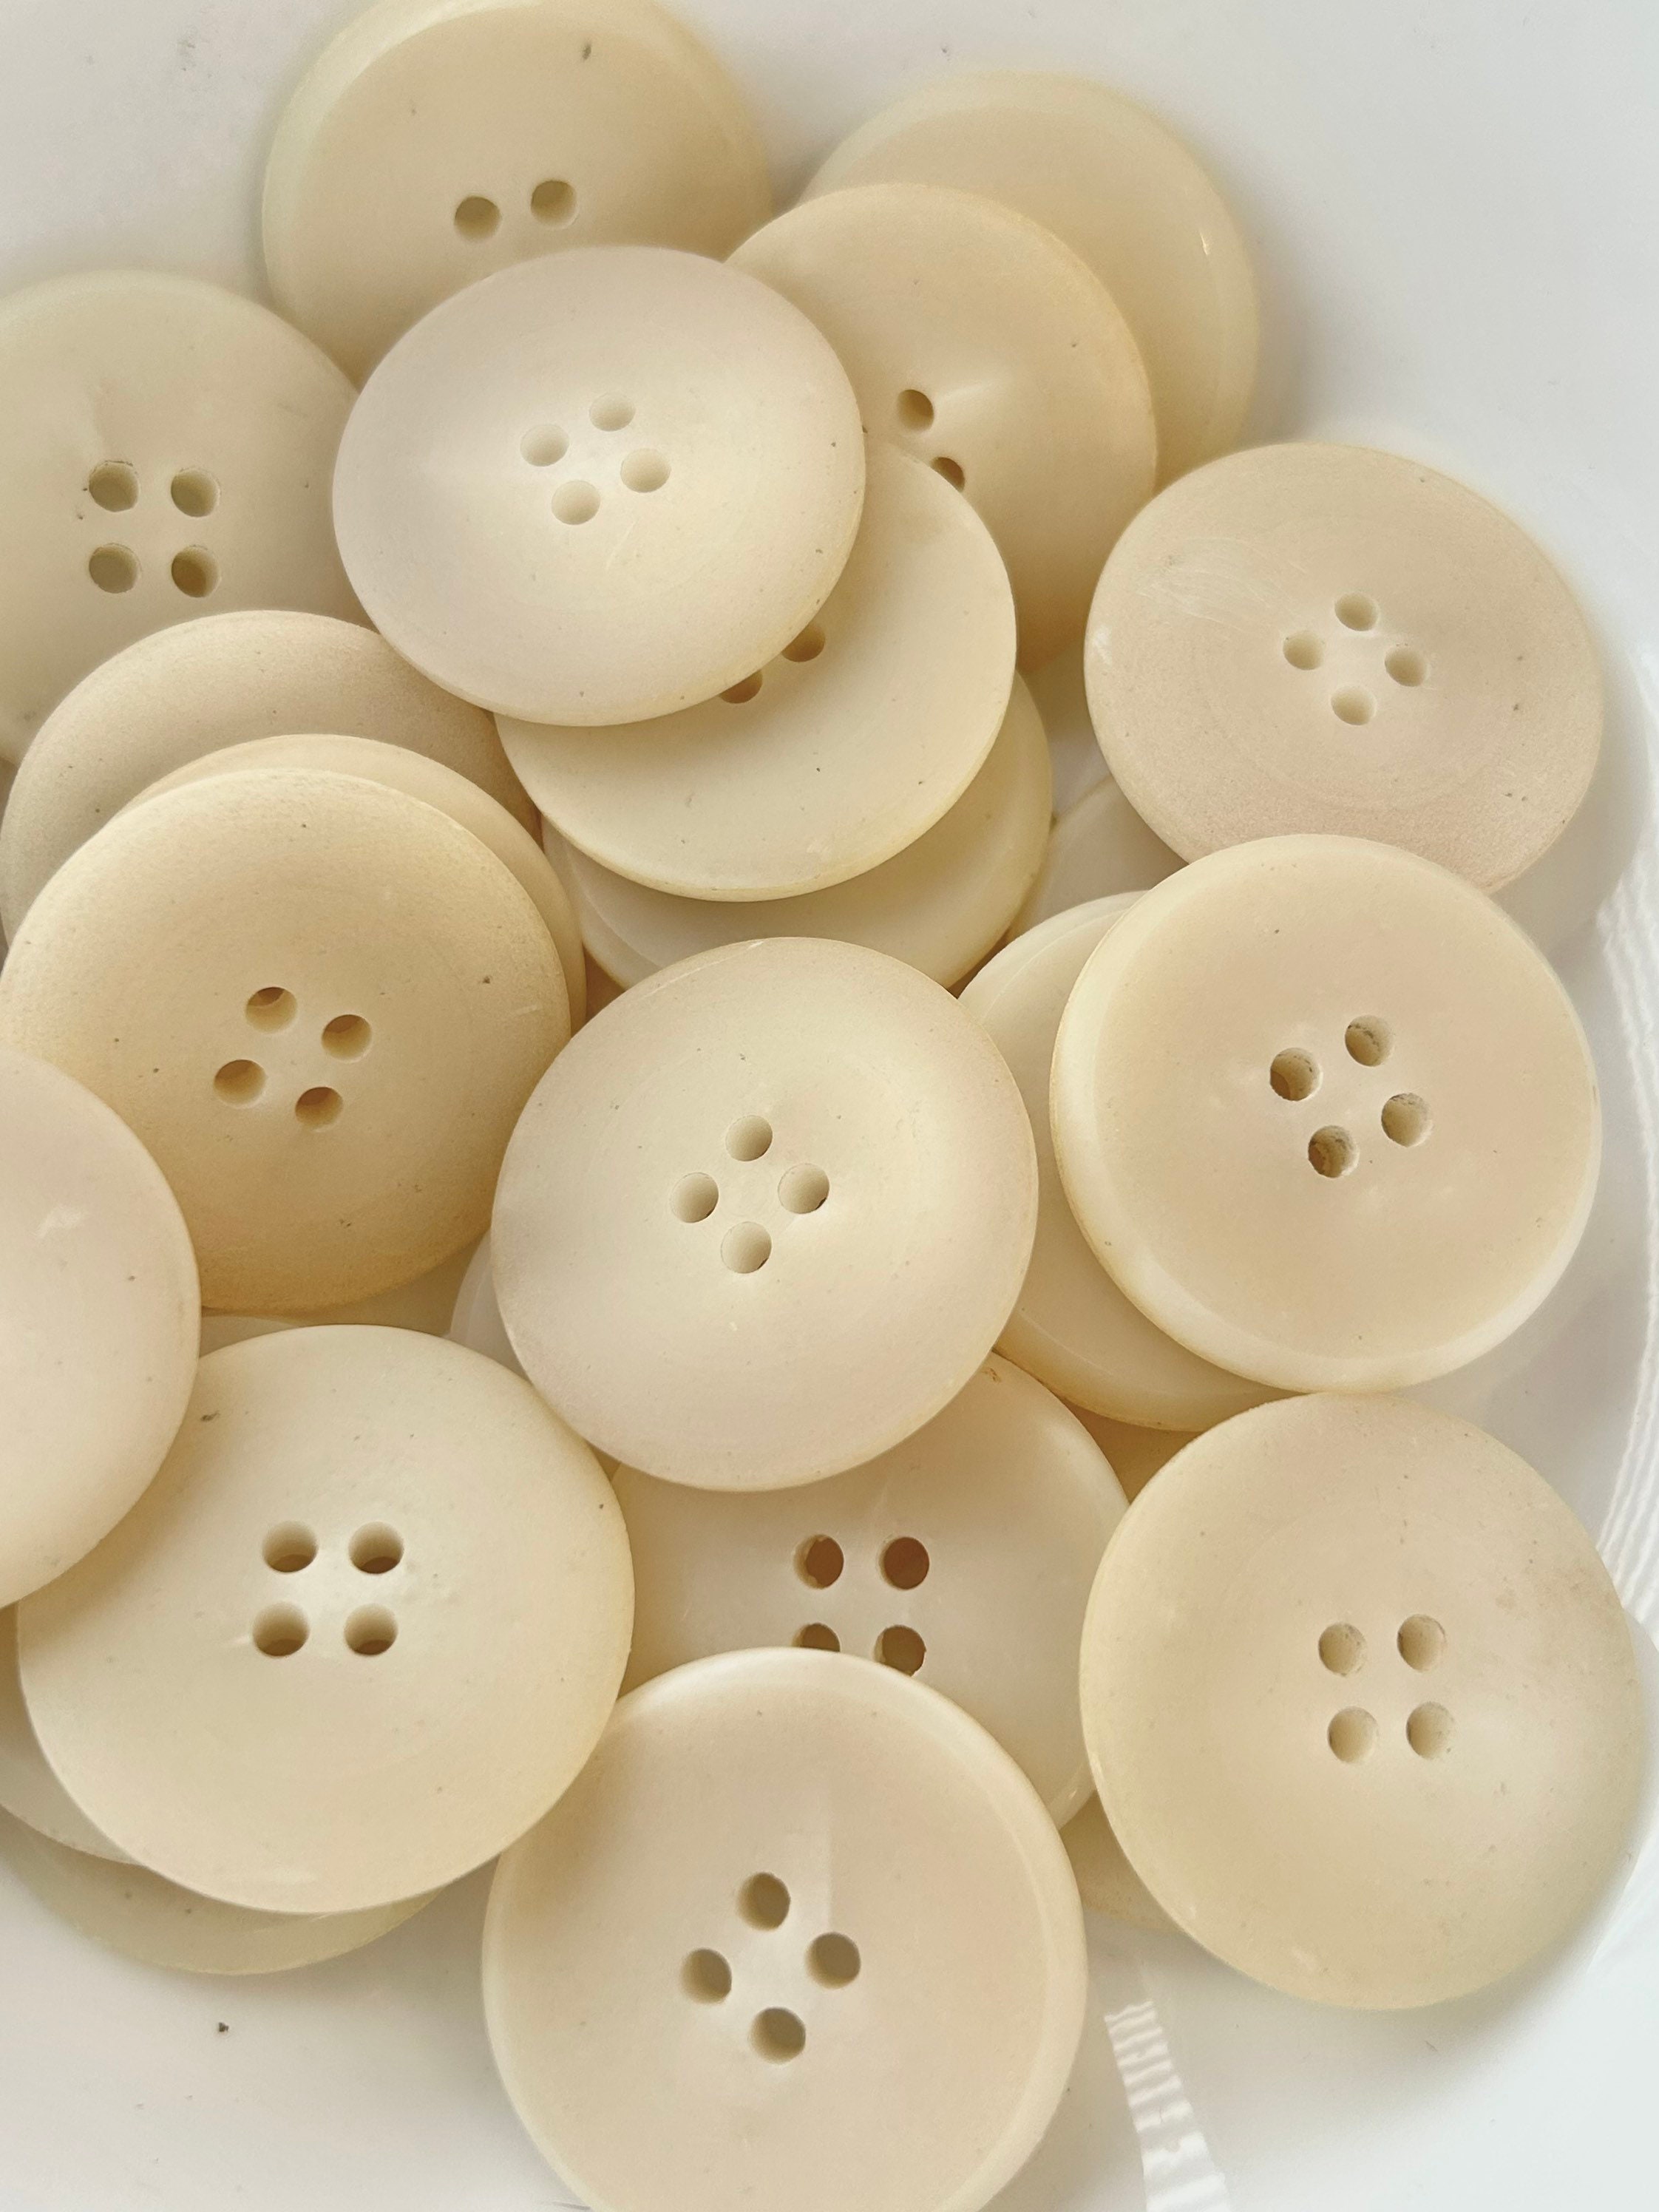 Giant Flower Buttons, Giant CREAM Flower Buttons 6.5cm, Extra Large  Buttons, Huge Novelty Button, Giant Children's Buttons, UK Buttons Shop 